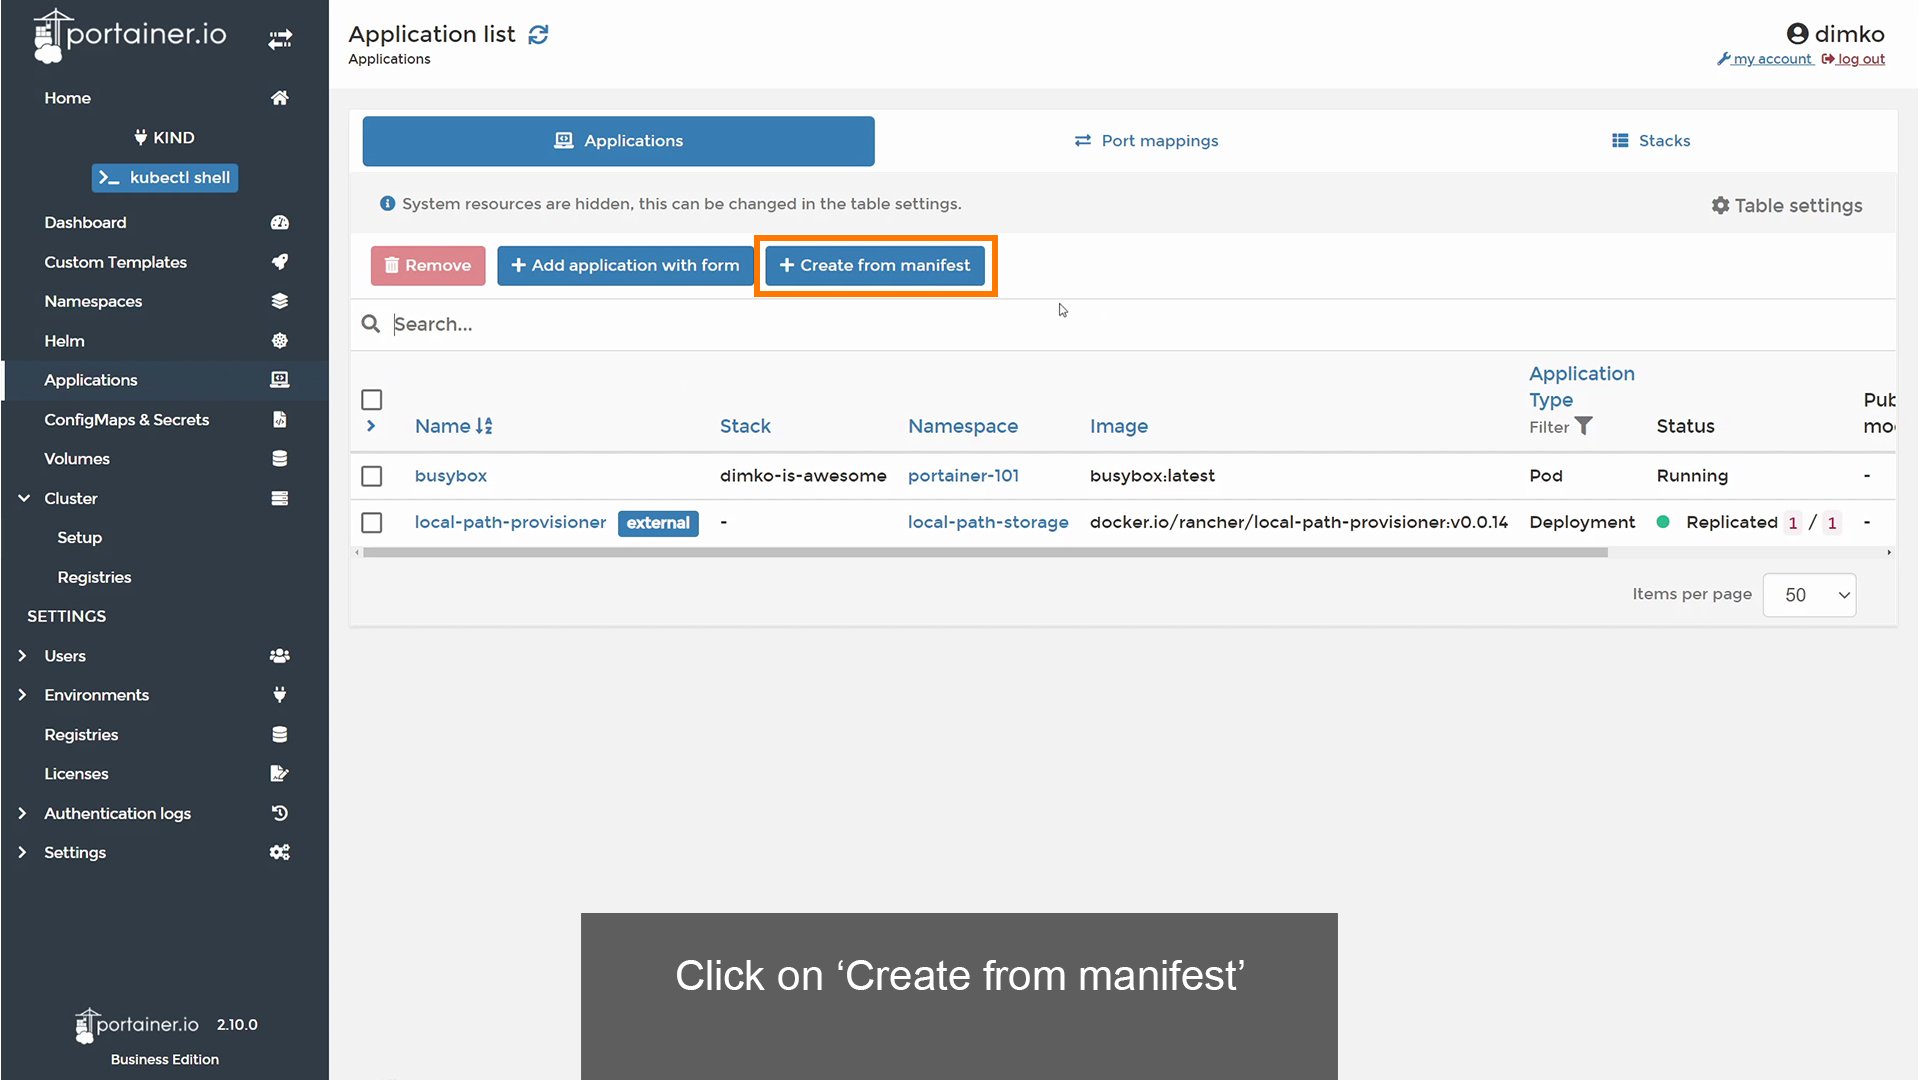 Click 'Create from manifest'